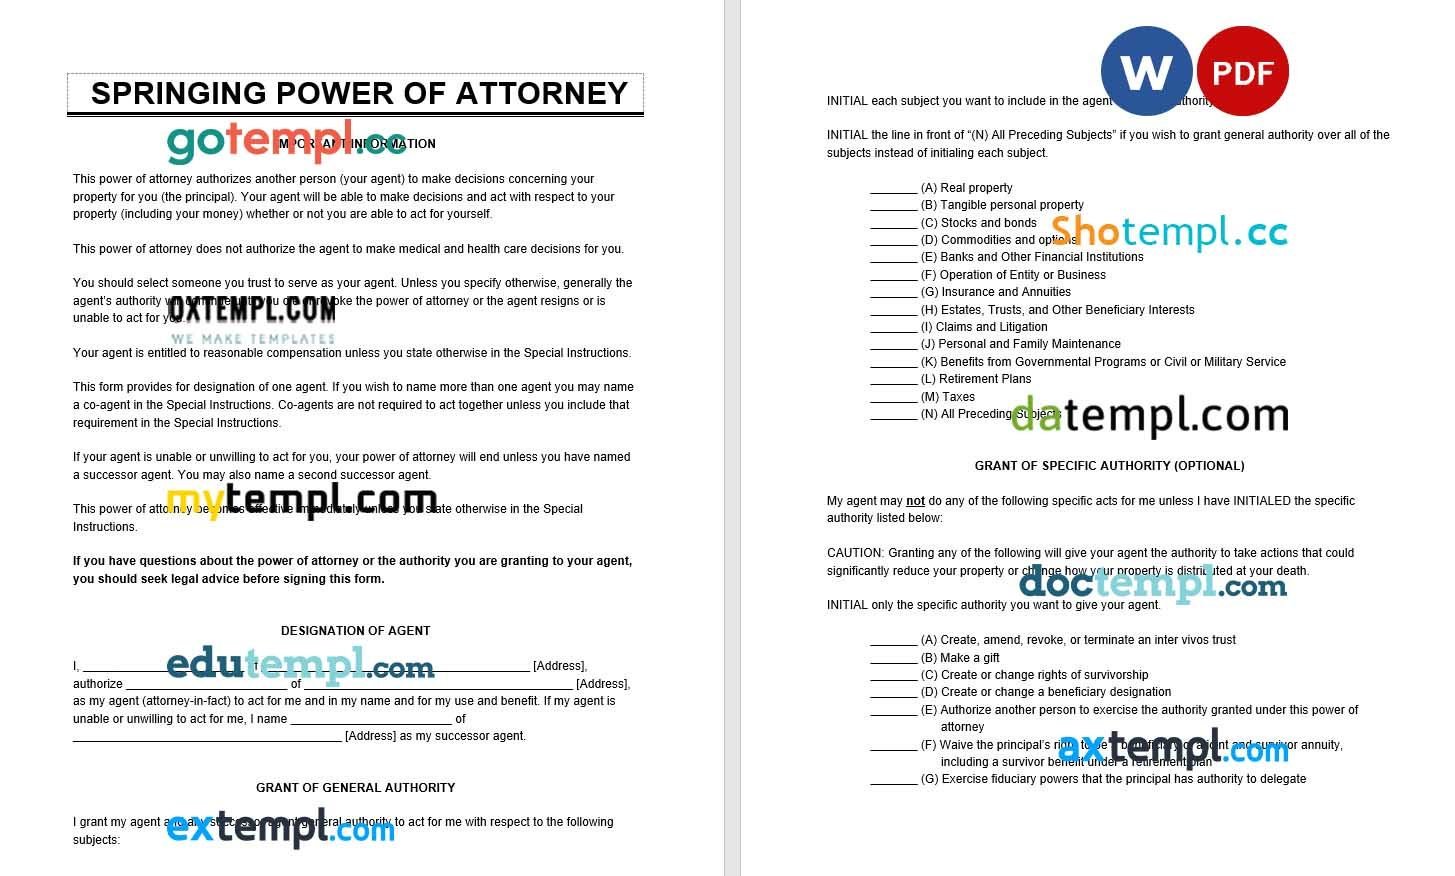 Springing Power of Attorney example, fully editable